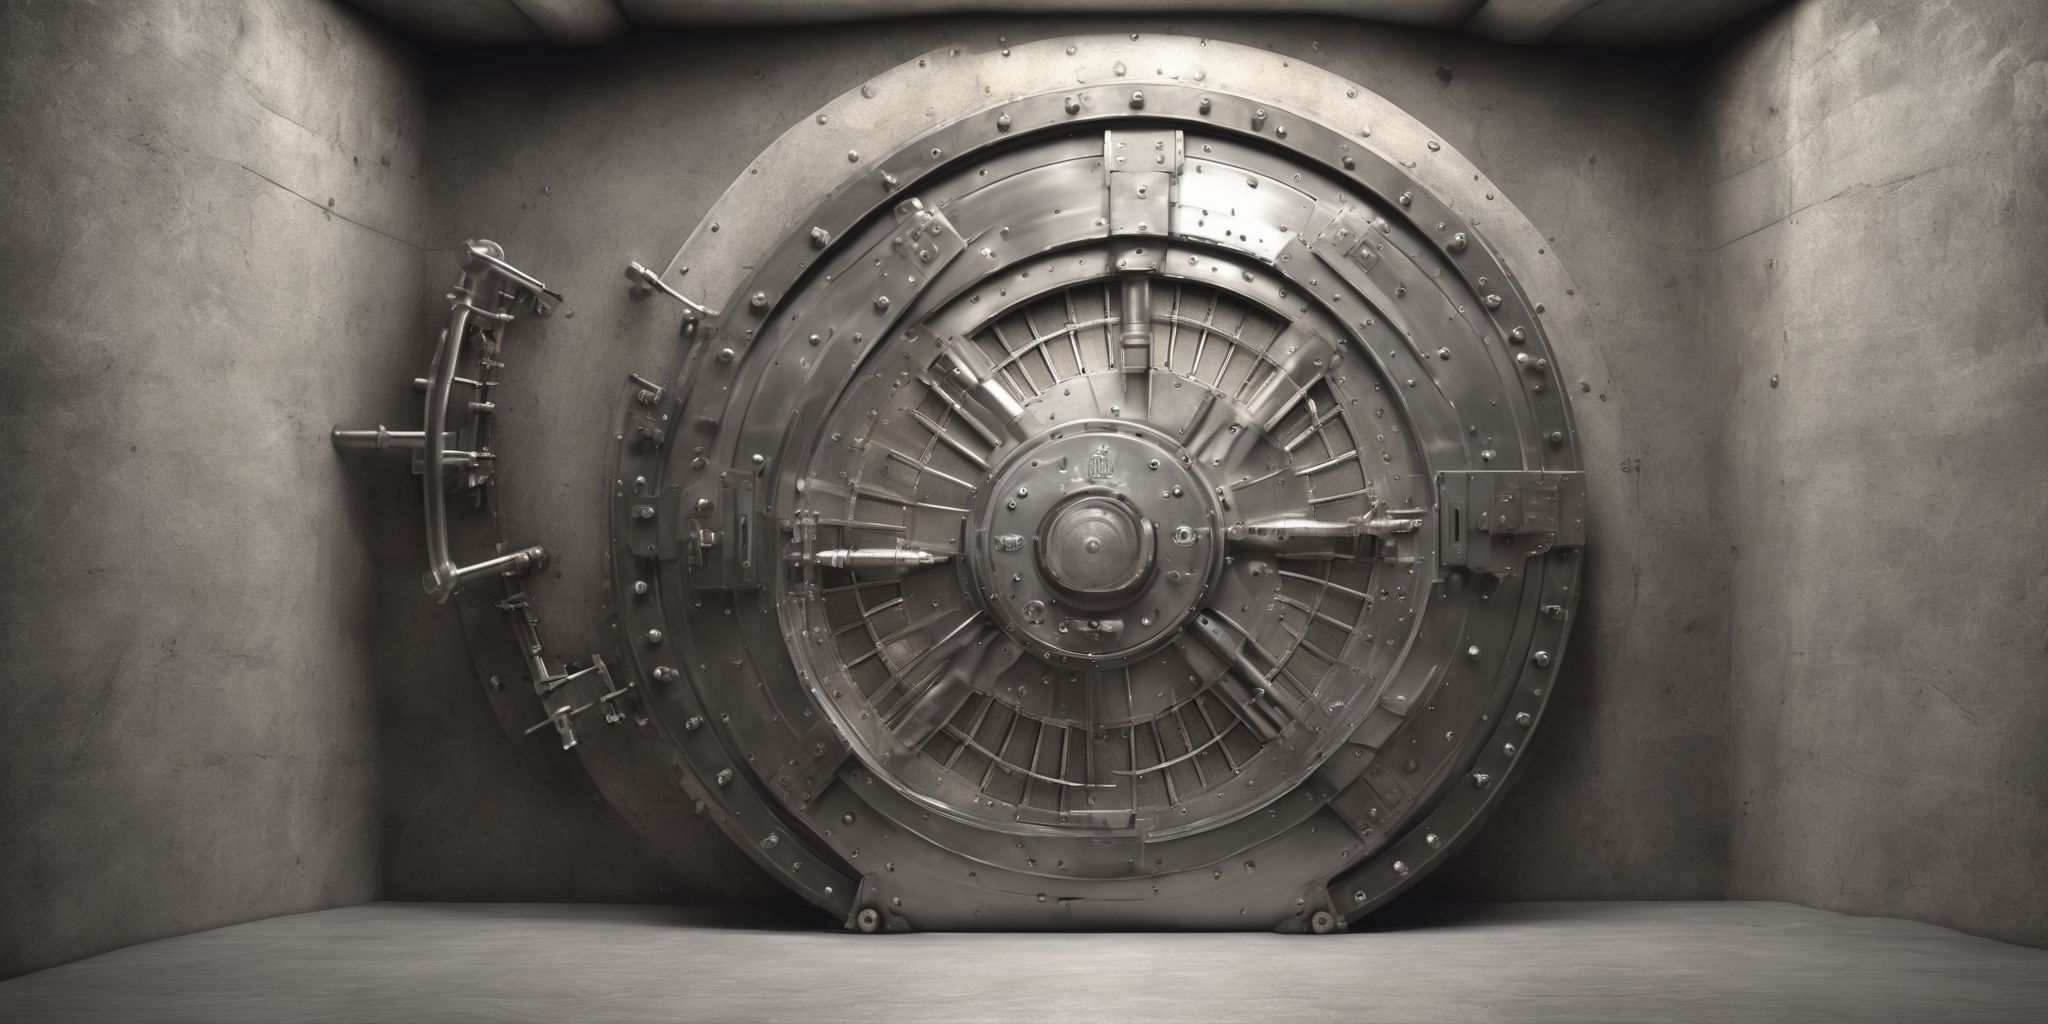 Vault  in realistic, photographic style